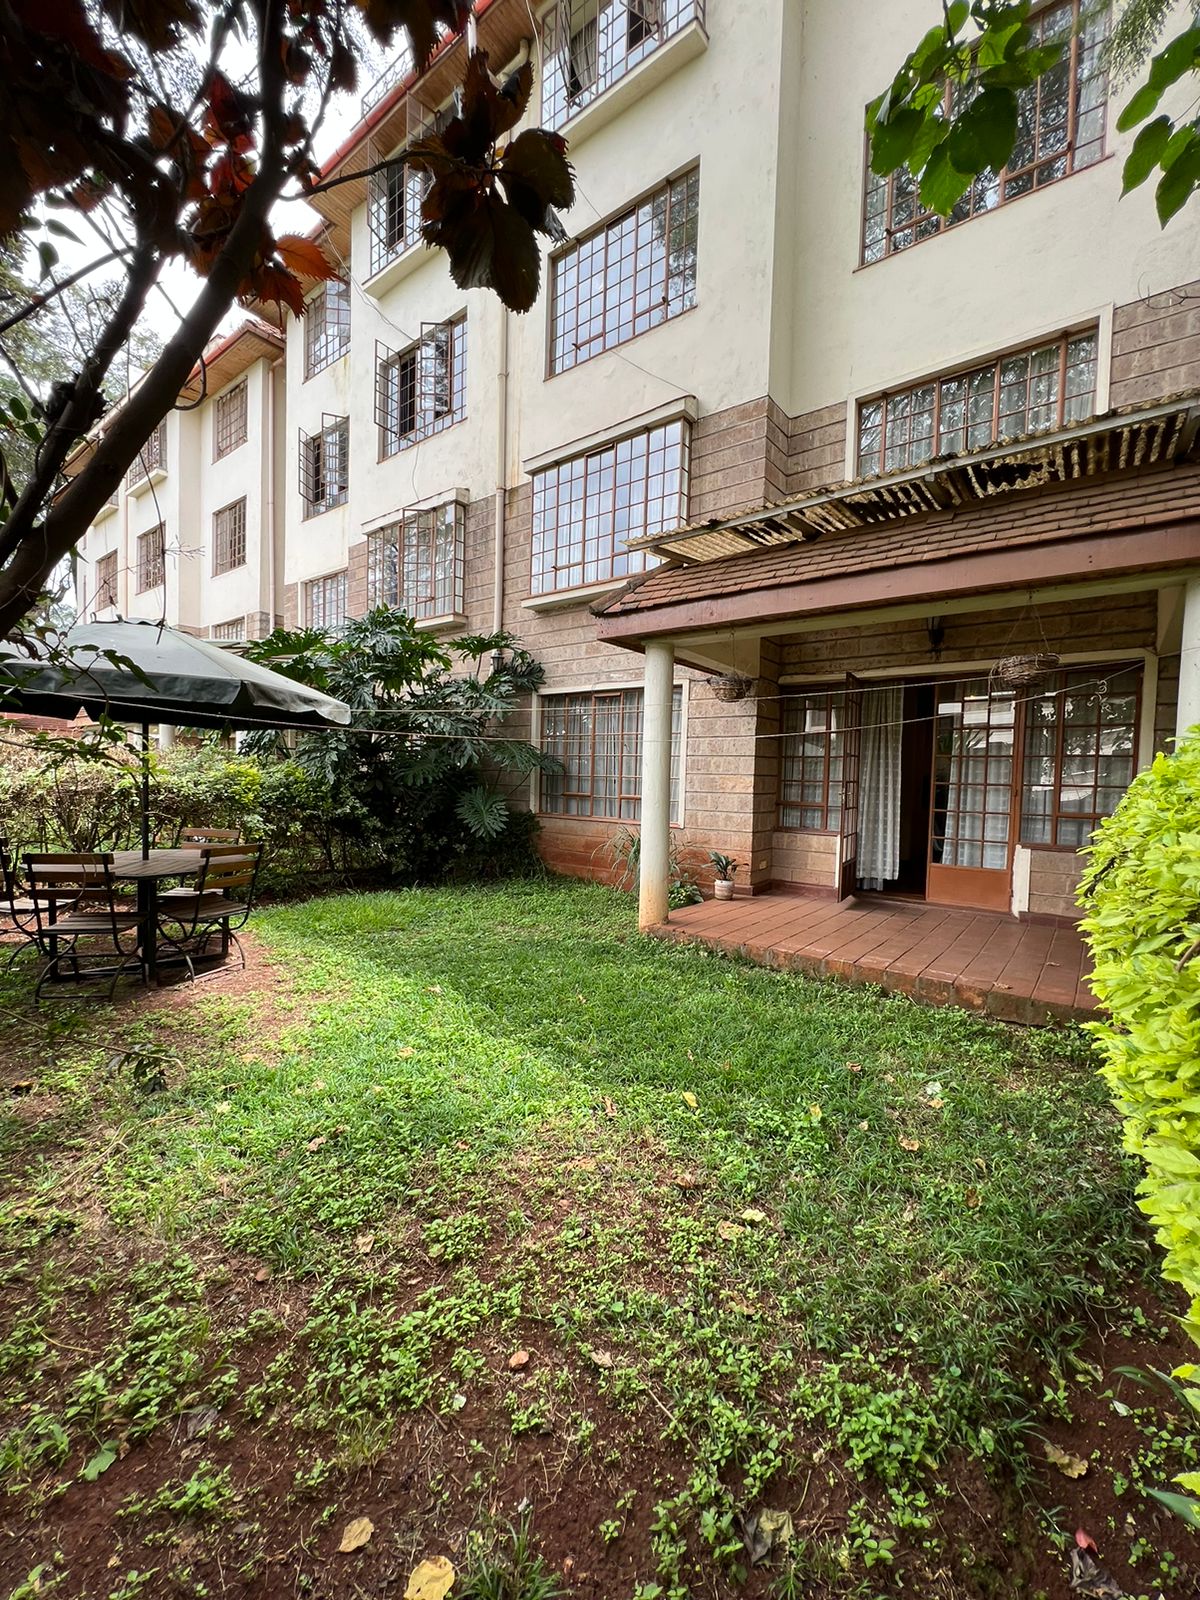 Fully Furnished 2 bedroom duplex apartment to let in Westlands, Nairobi. Rent per month 140,000. Listed by Musilli Homes